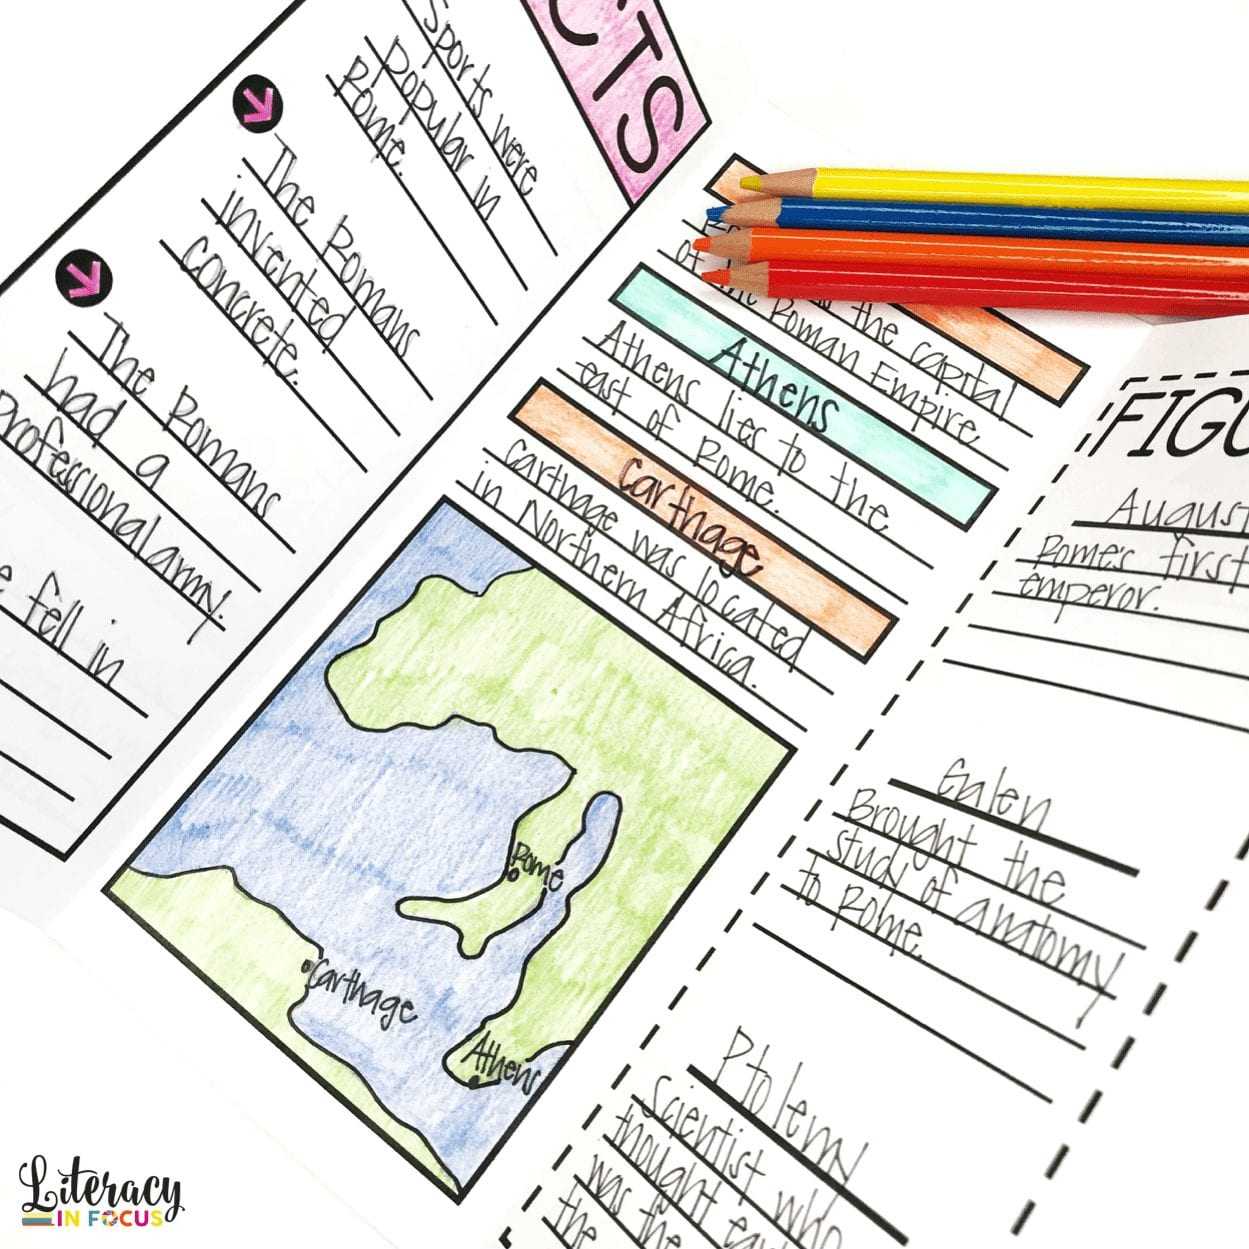 Historical Travel Brochure And Research Project | Literacy In Brochure Rubric Template